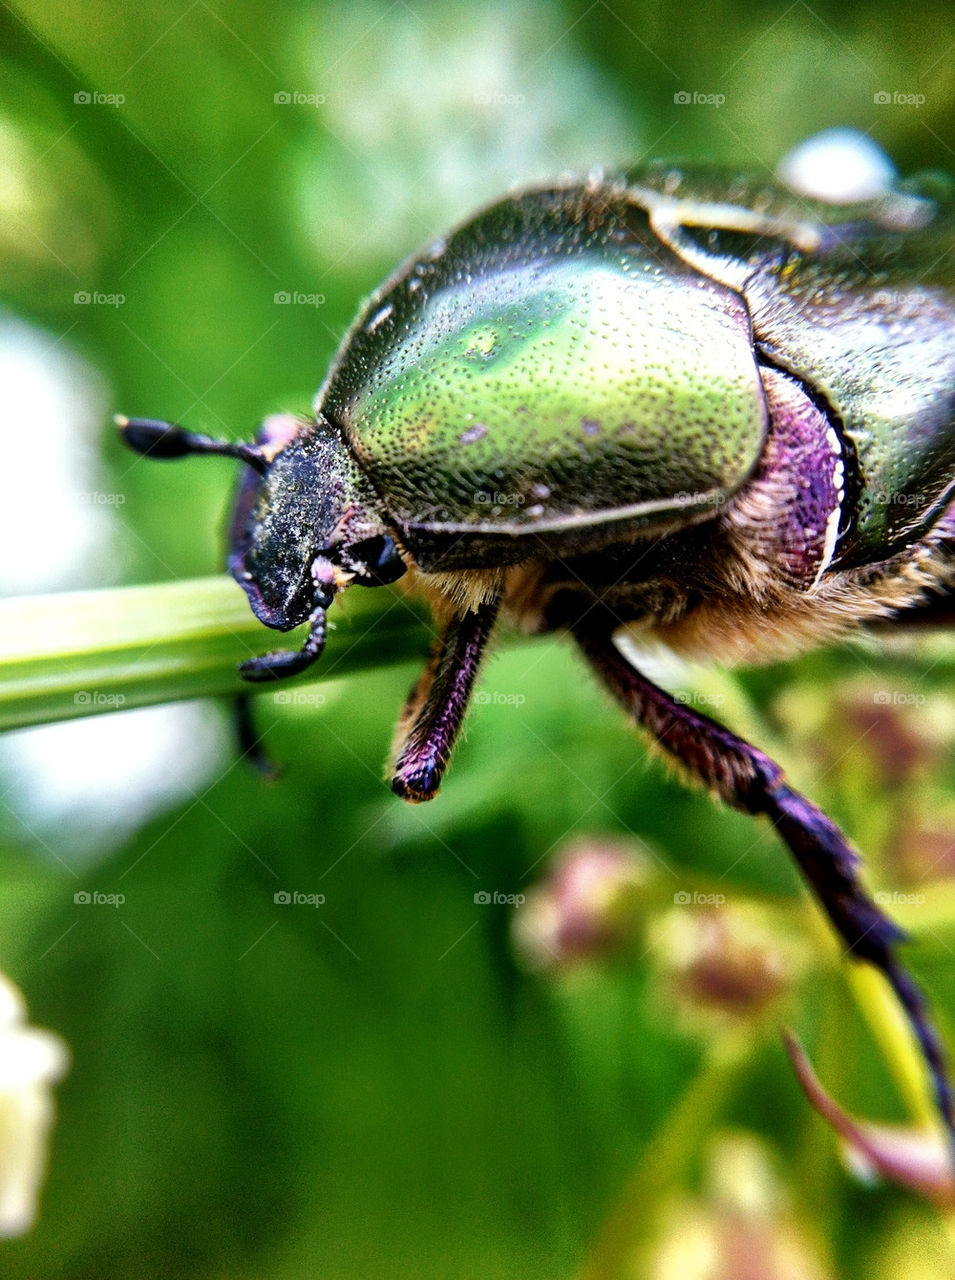 garden animals insects bugs by ka71